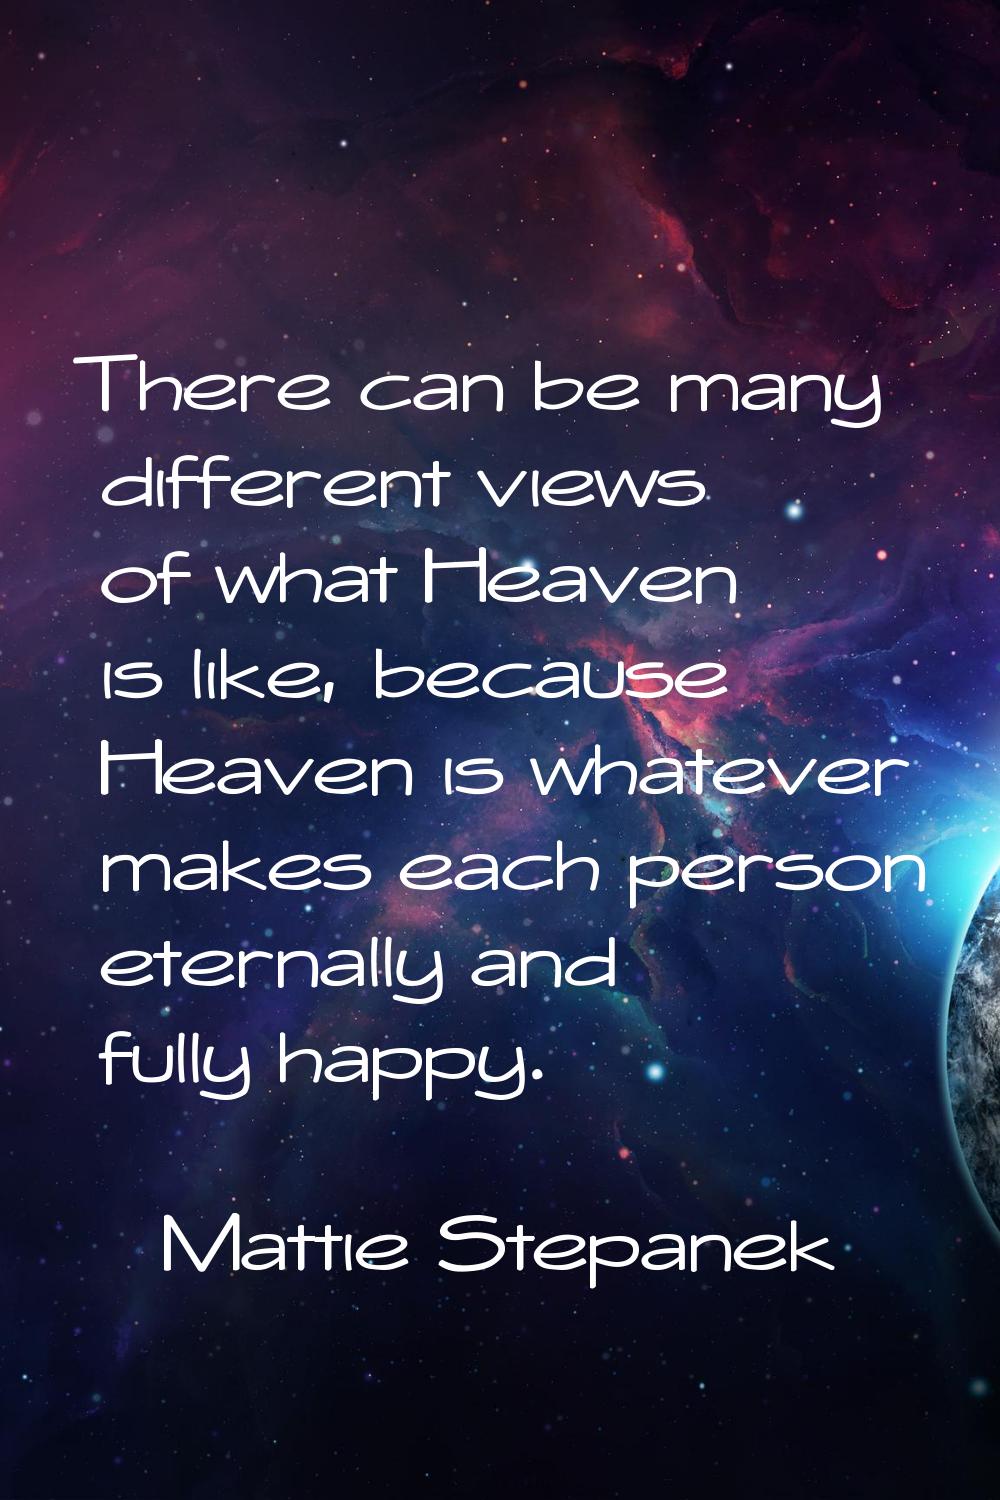 There can be many different views of what Heaven is like, because Heaven is whatever makes each per